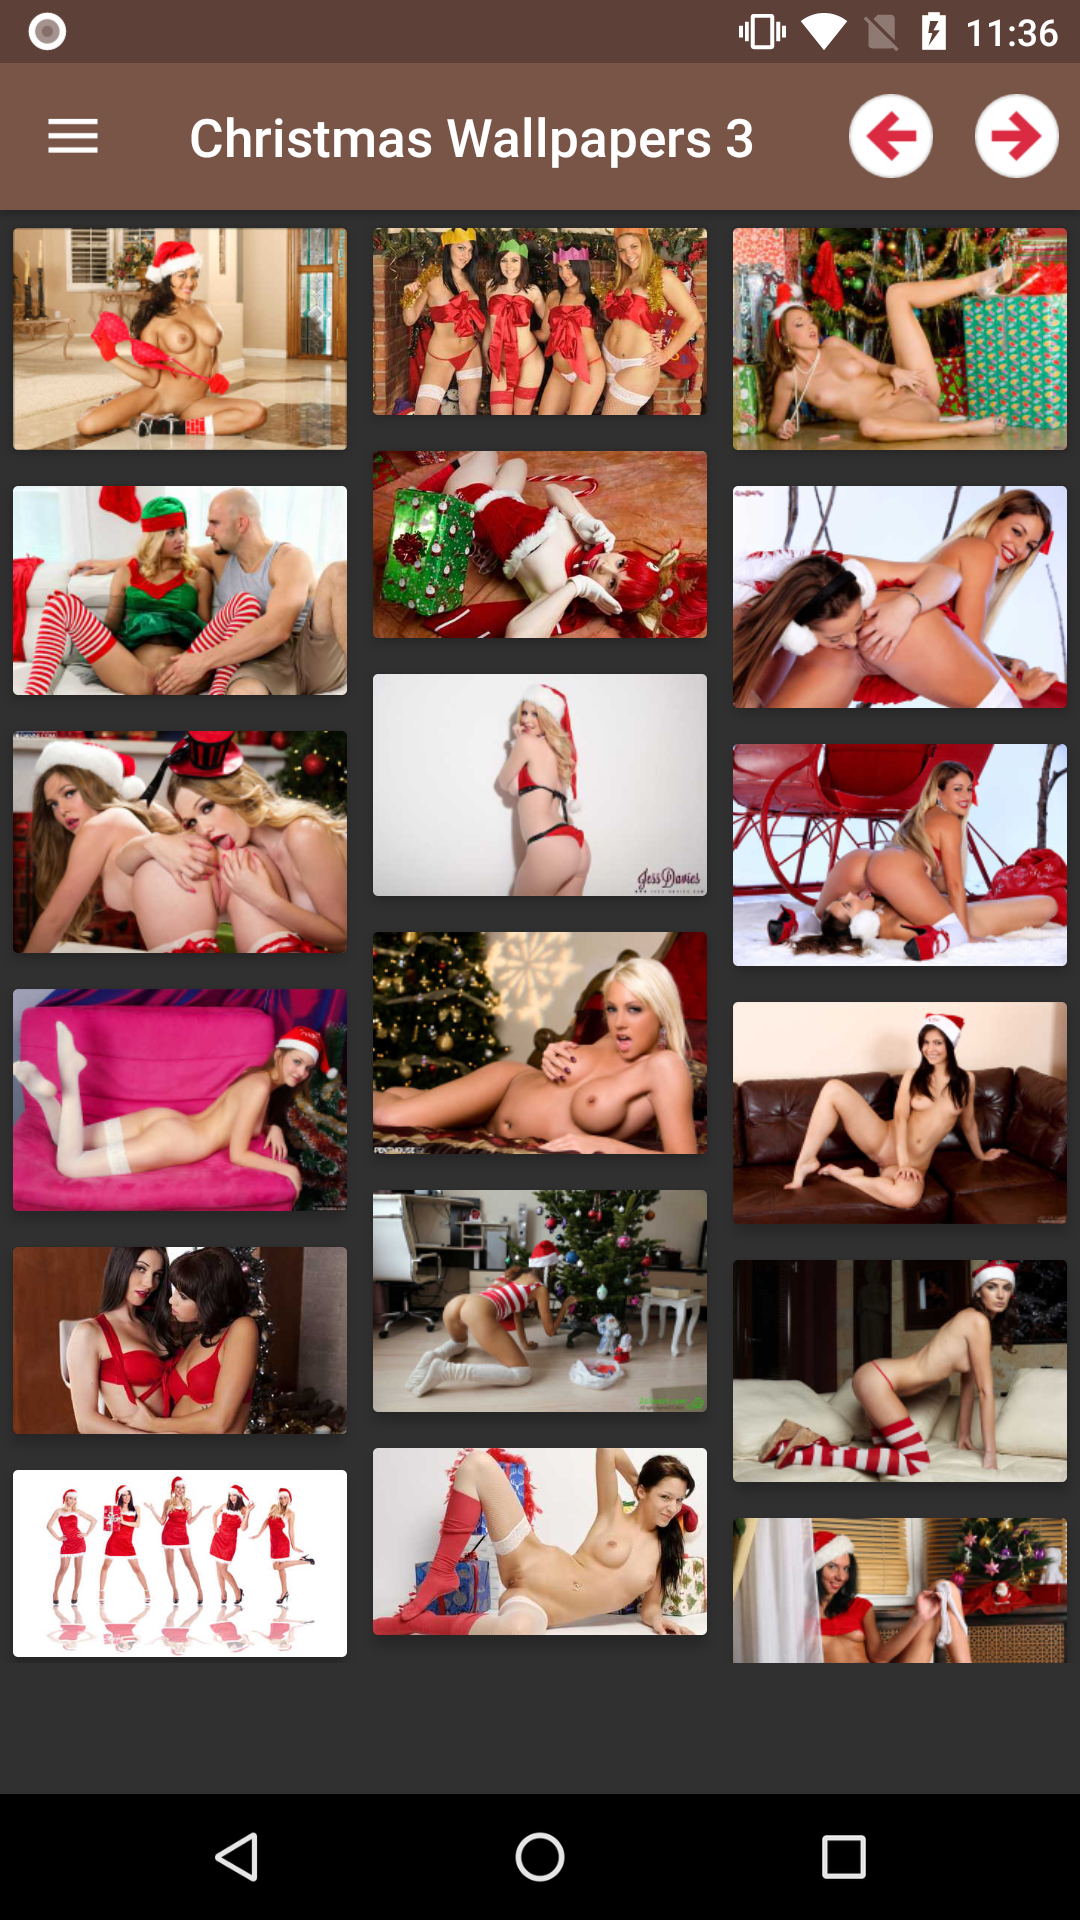 Sexy Christmas Wallpapers 2 android,adult,sexy,hentai,top,backgrounds,futanari,femboy,erotic,rated,mature,topless,picture,harem,wallpapers,apps,galleries,porn,andriod,browser,comix,apk,wallpaper,holidays,app